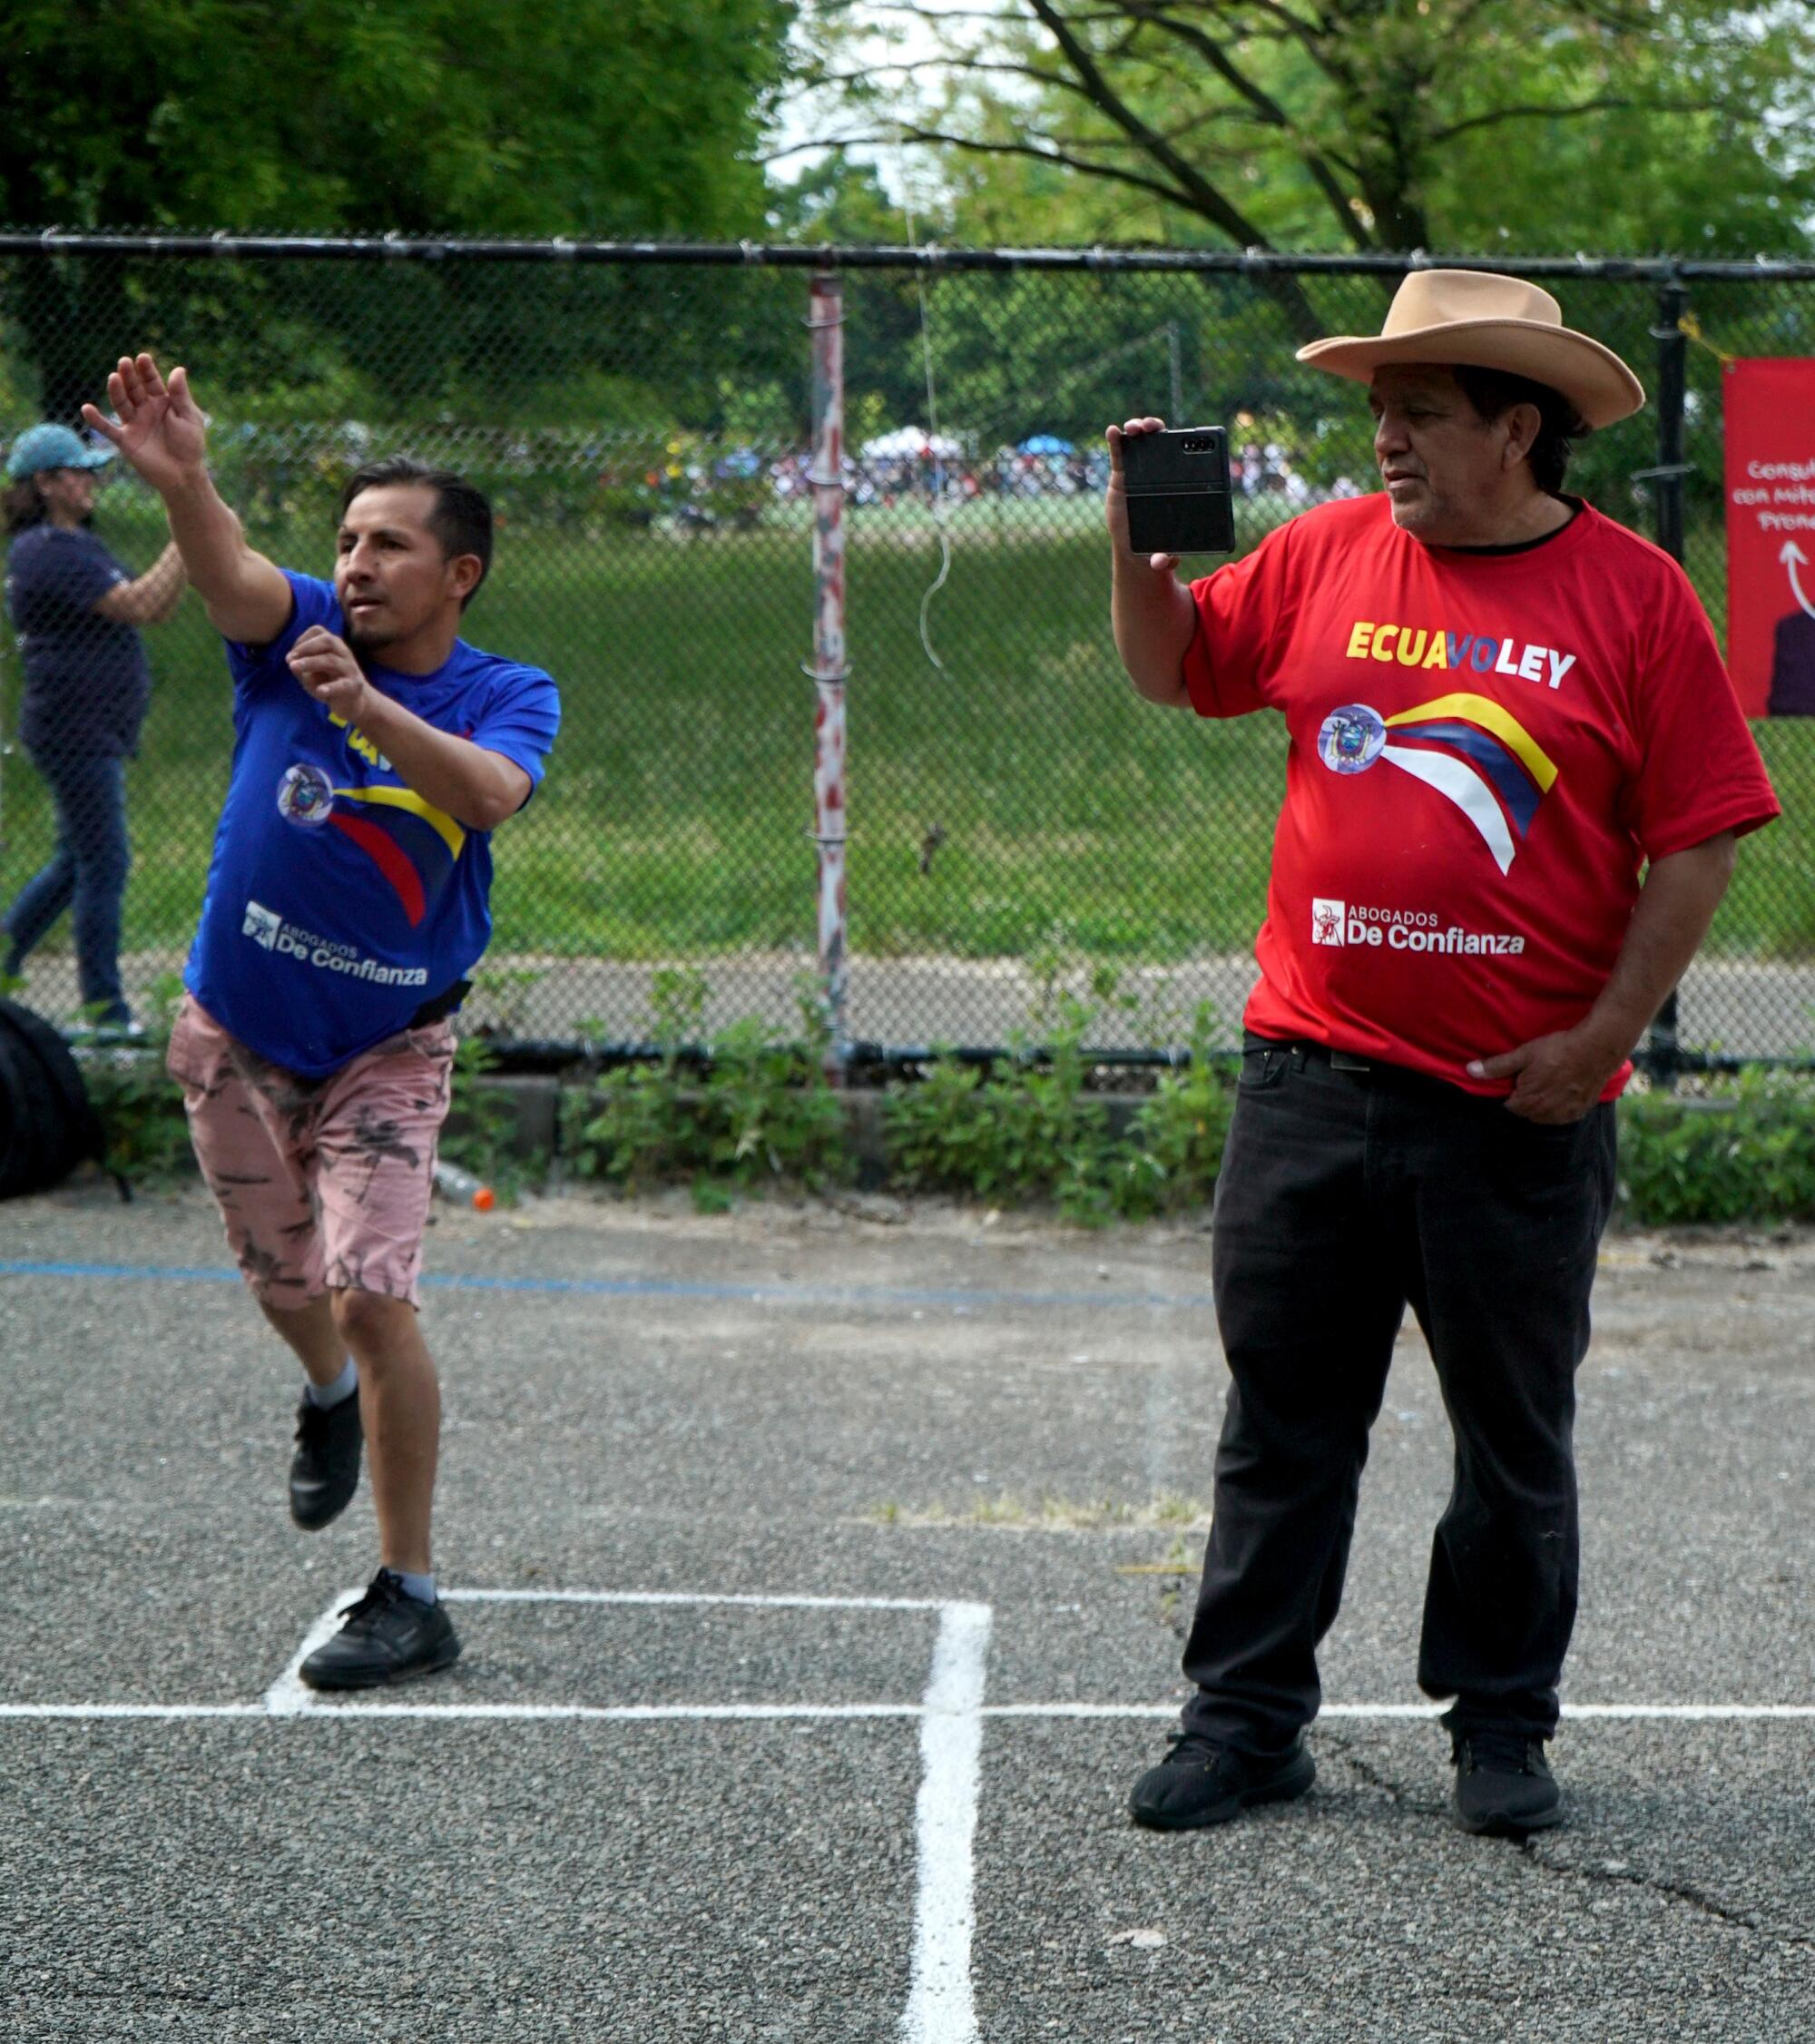 A man wearing blue plays ecuavoley while another wearing red and a cowboy hat films him.